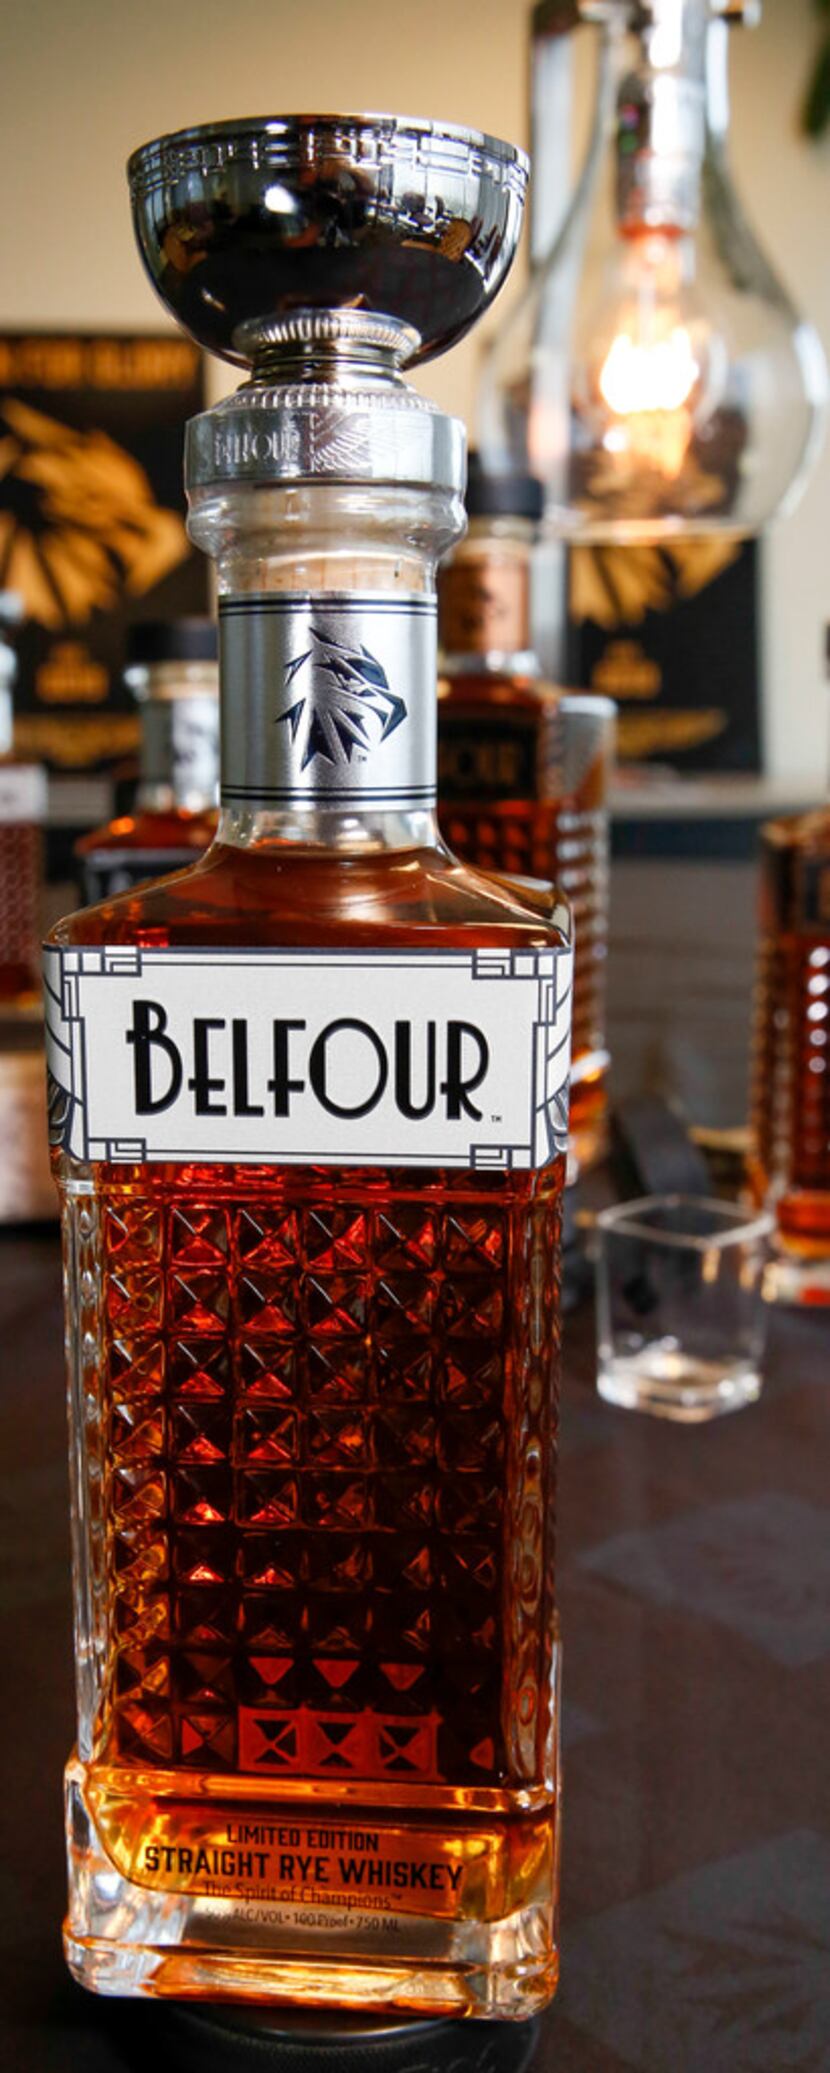 The Limited Edition Straight Rye Whiskey from Belfour Spirits is topped with a 1-ounce...